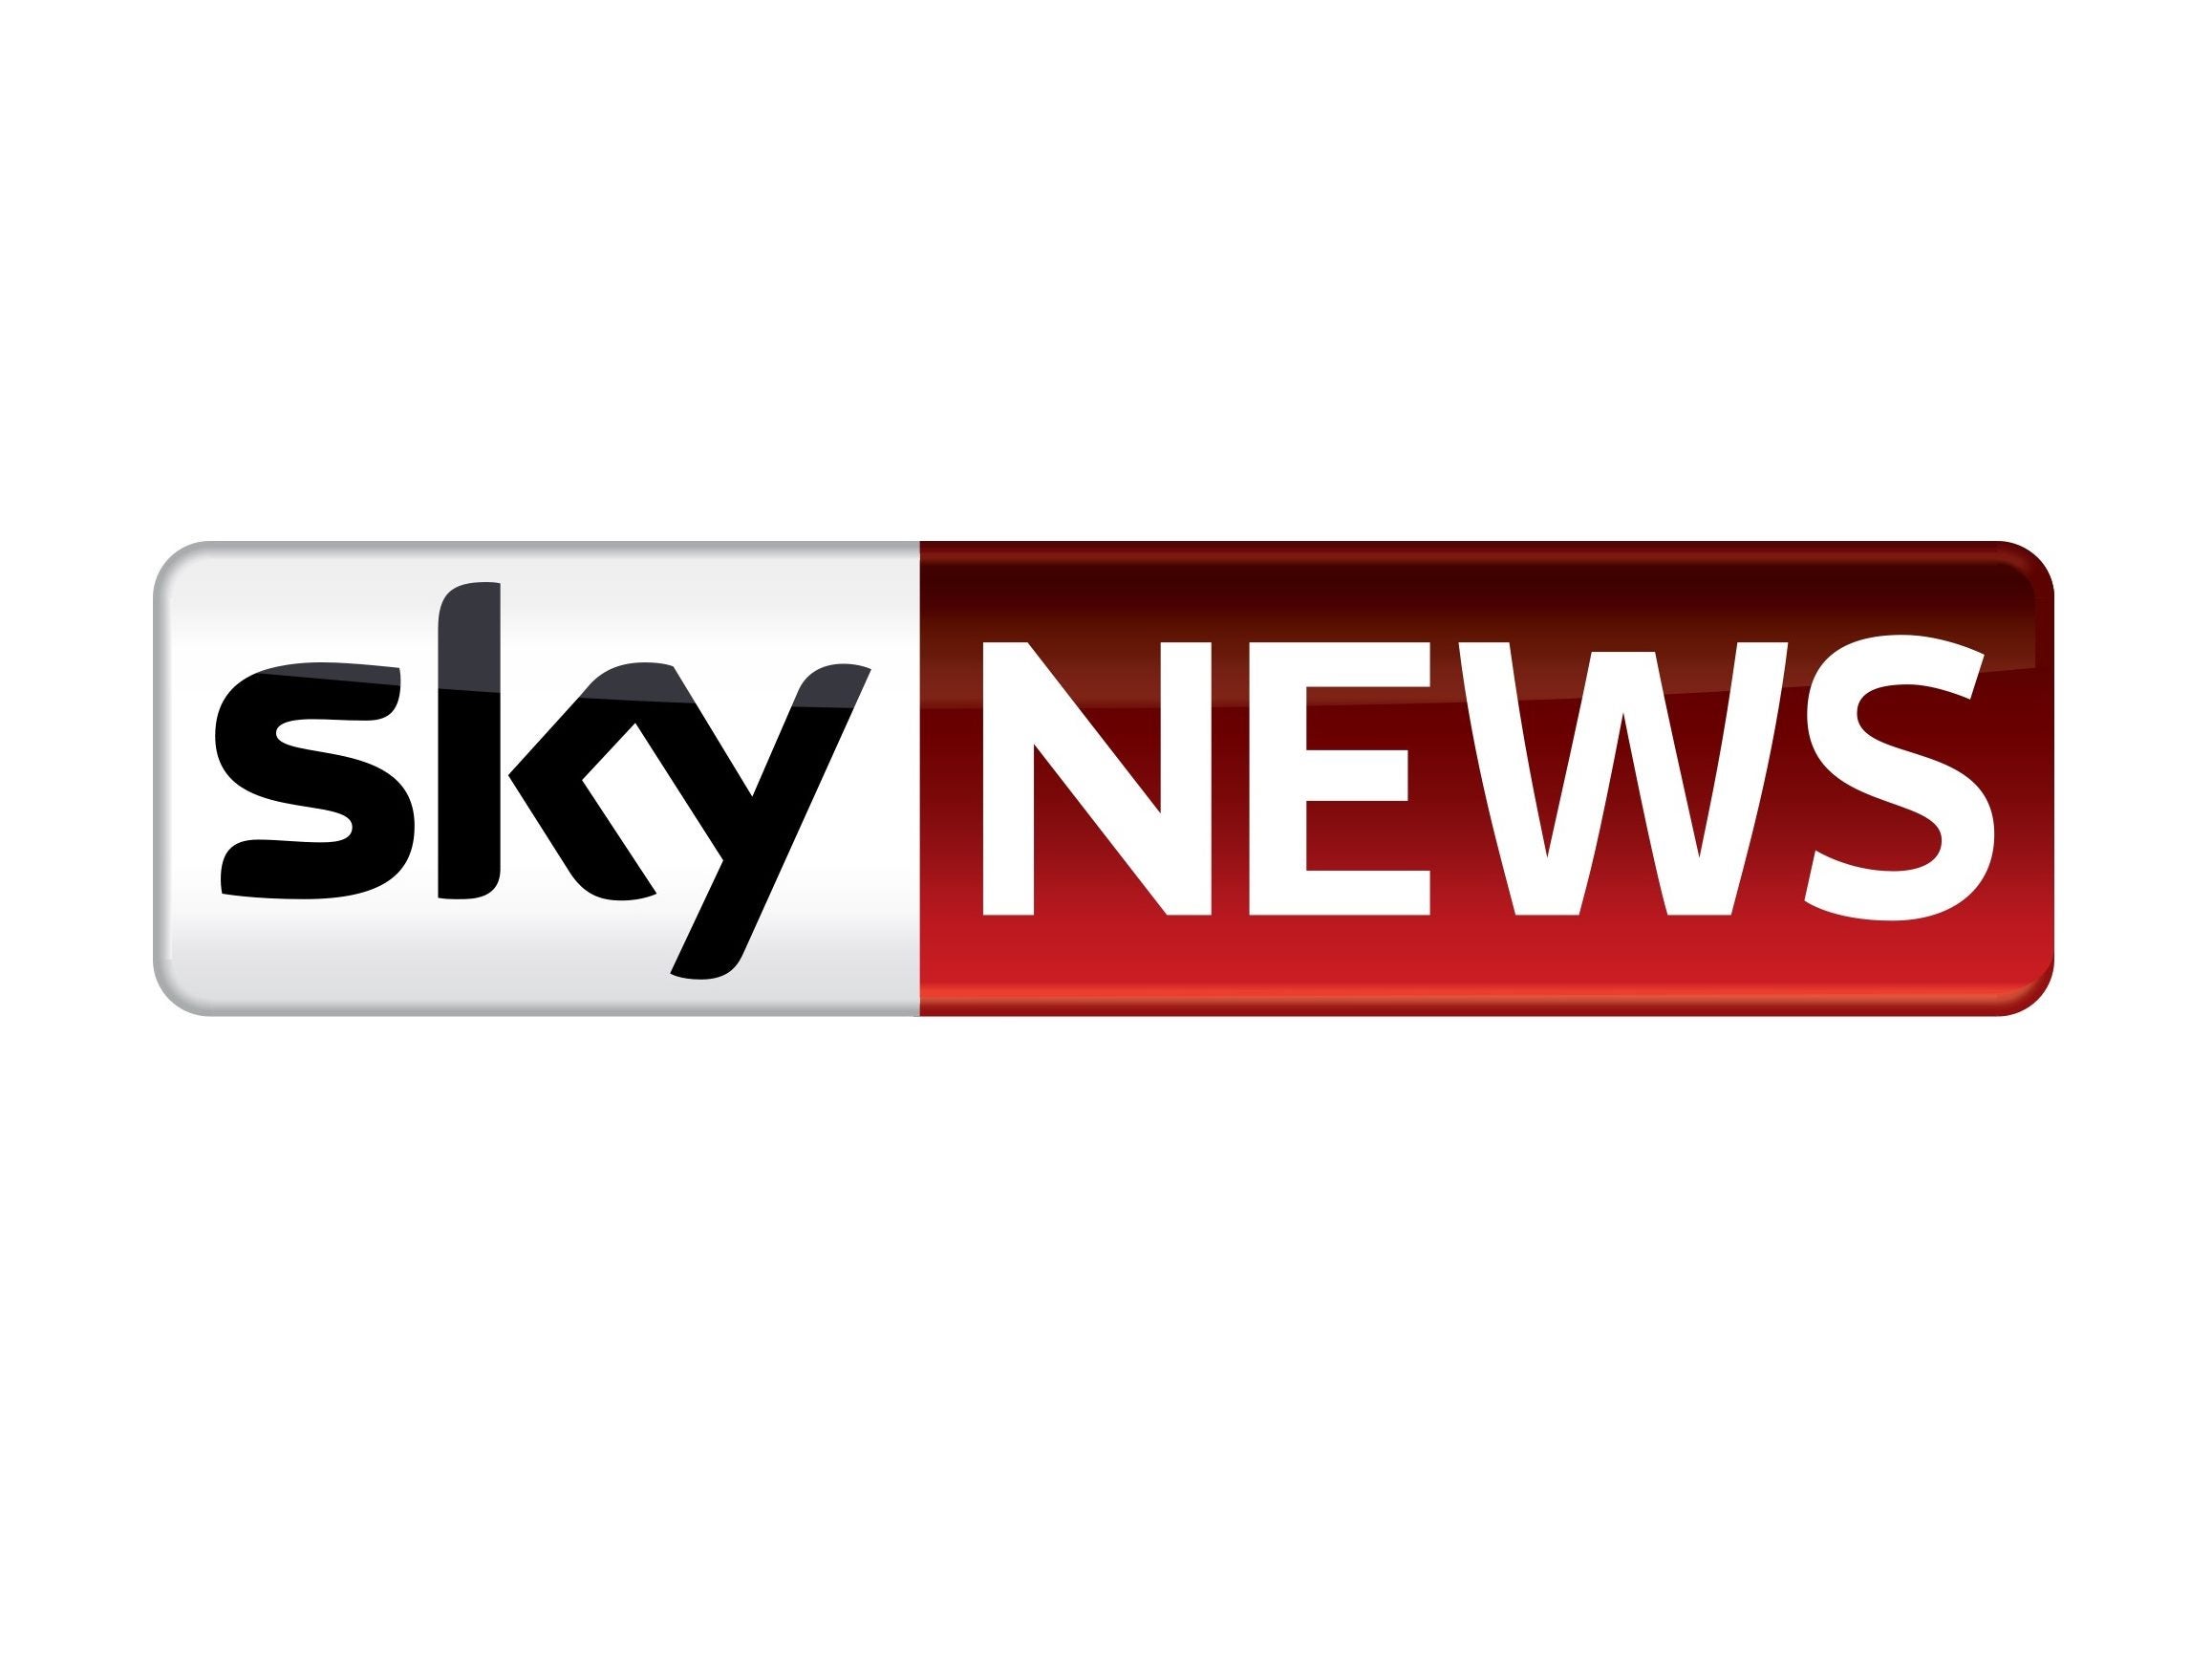 Sky News presenters could be among 700 staff to benefit from £350m bonus payout as shares rise amid bidding war